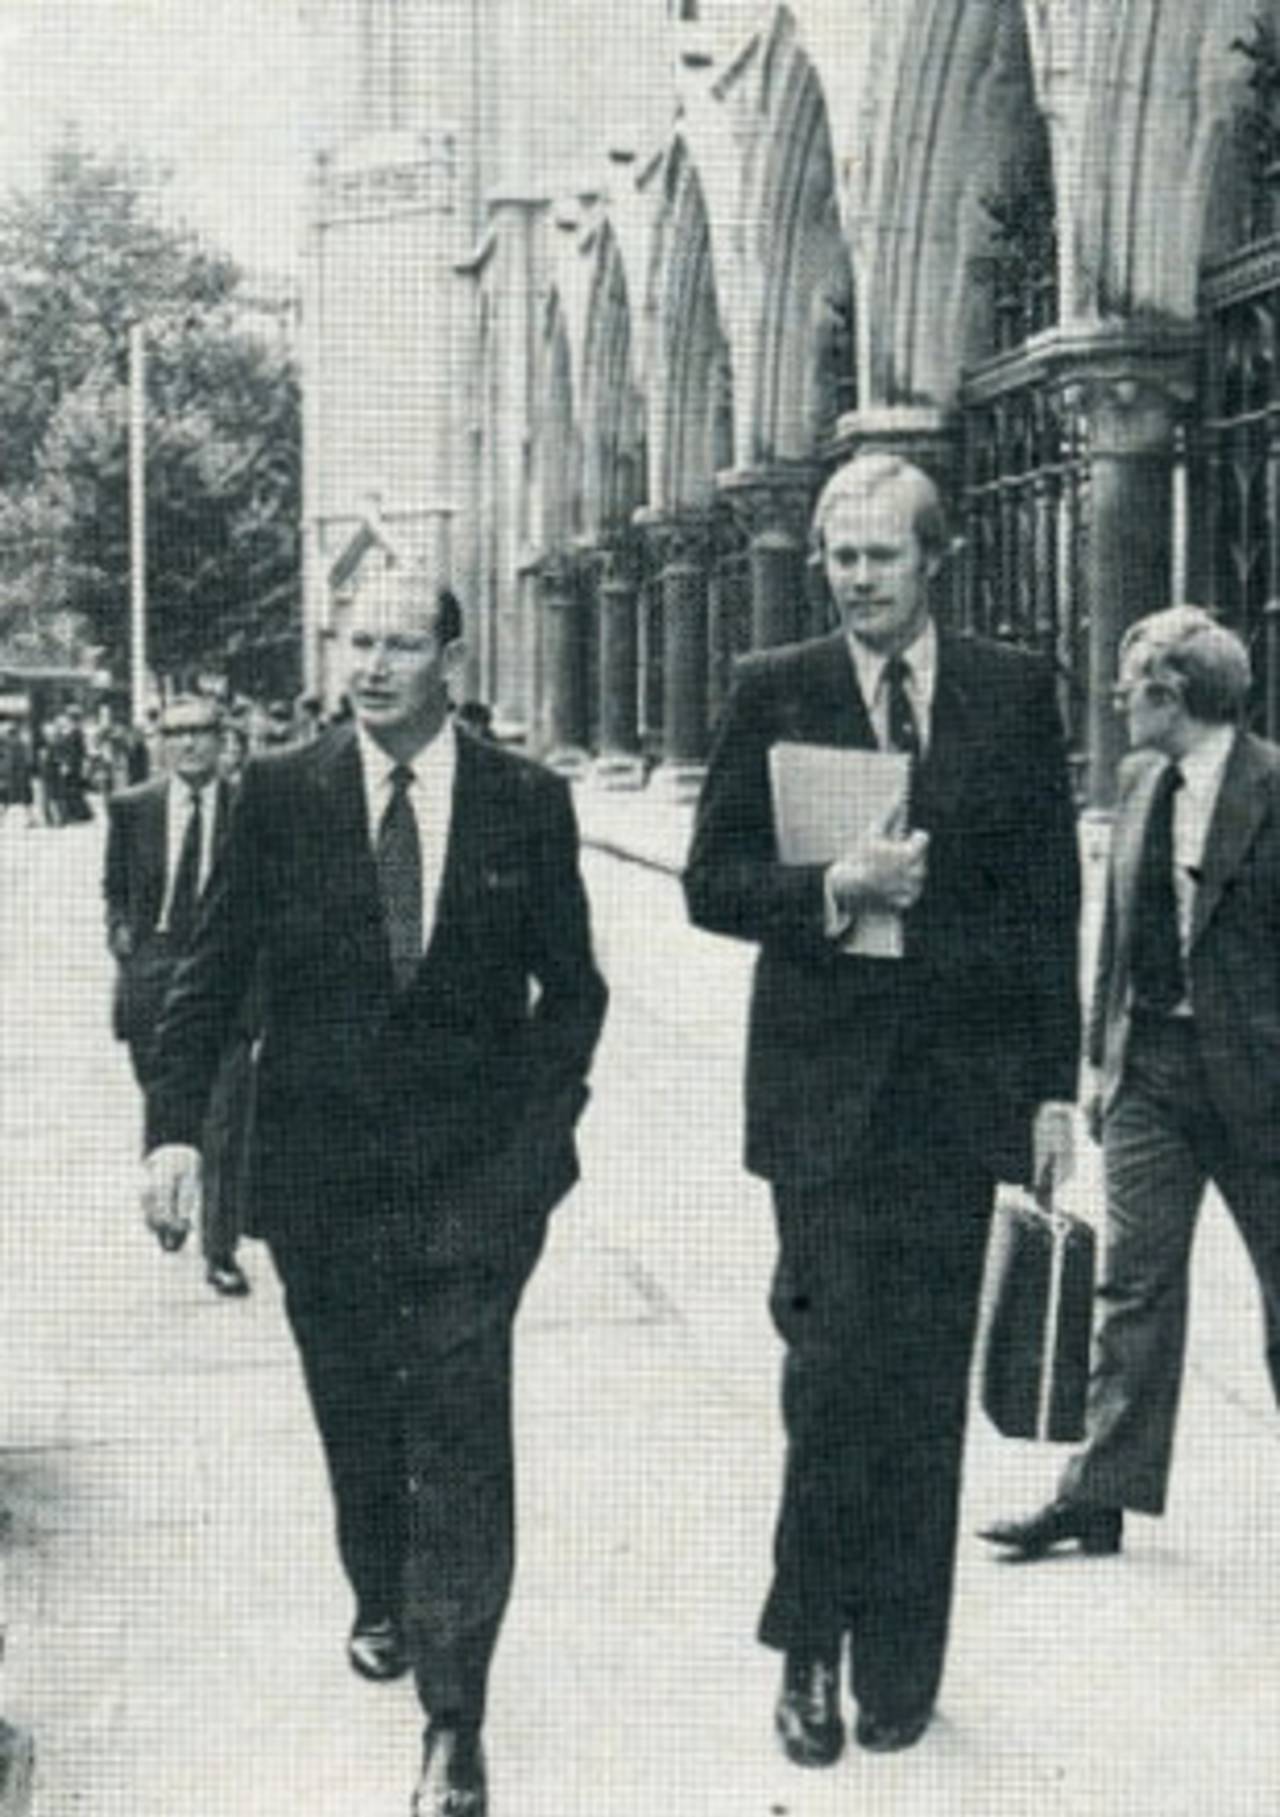 Kerry Packer and Tony Greig, his right-hand man, arrive at the High Court in London&nbsp;&nbsp;&bull;&nbsp;&nbsp;The Cricketer International